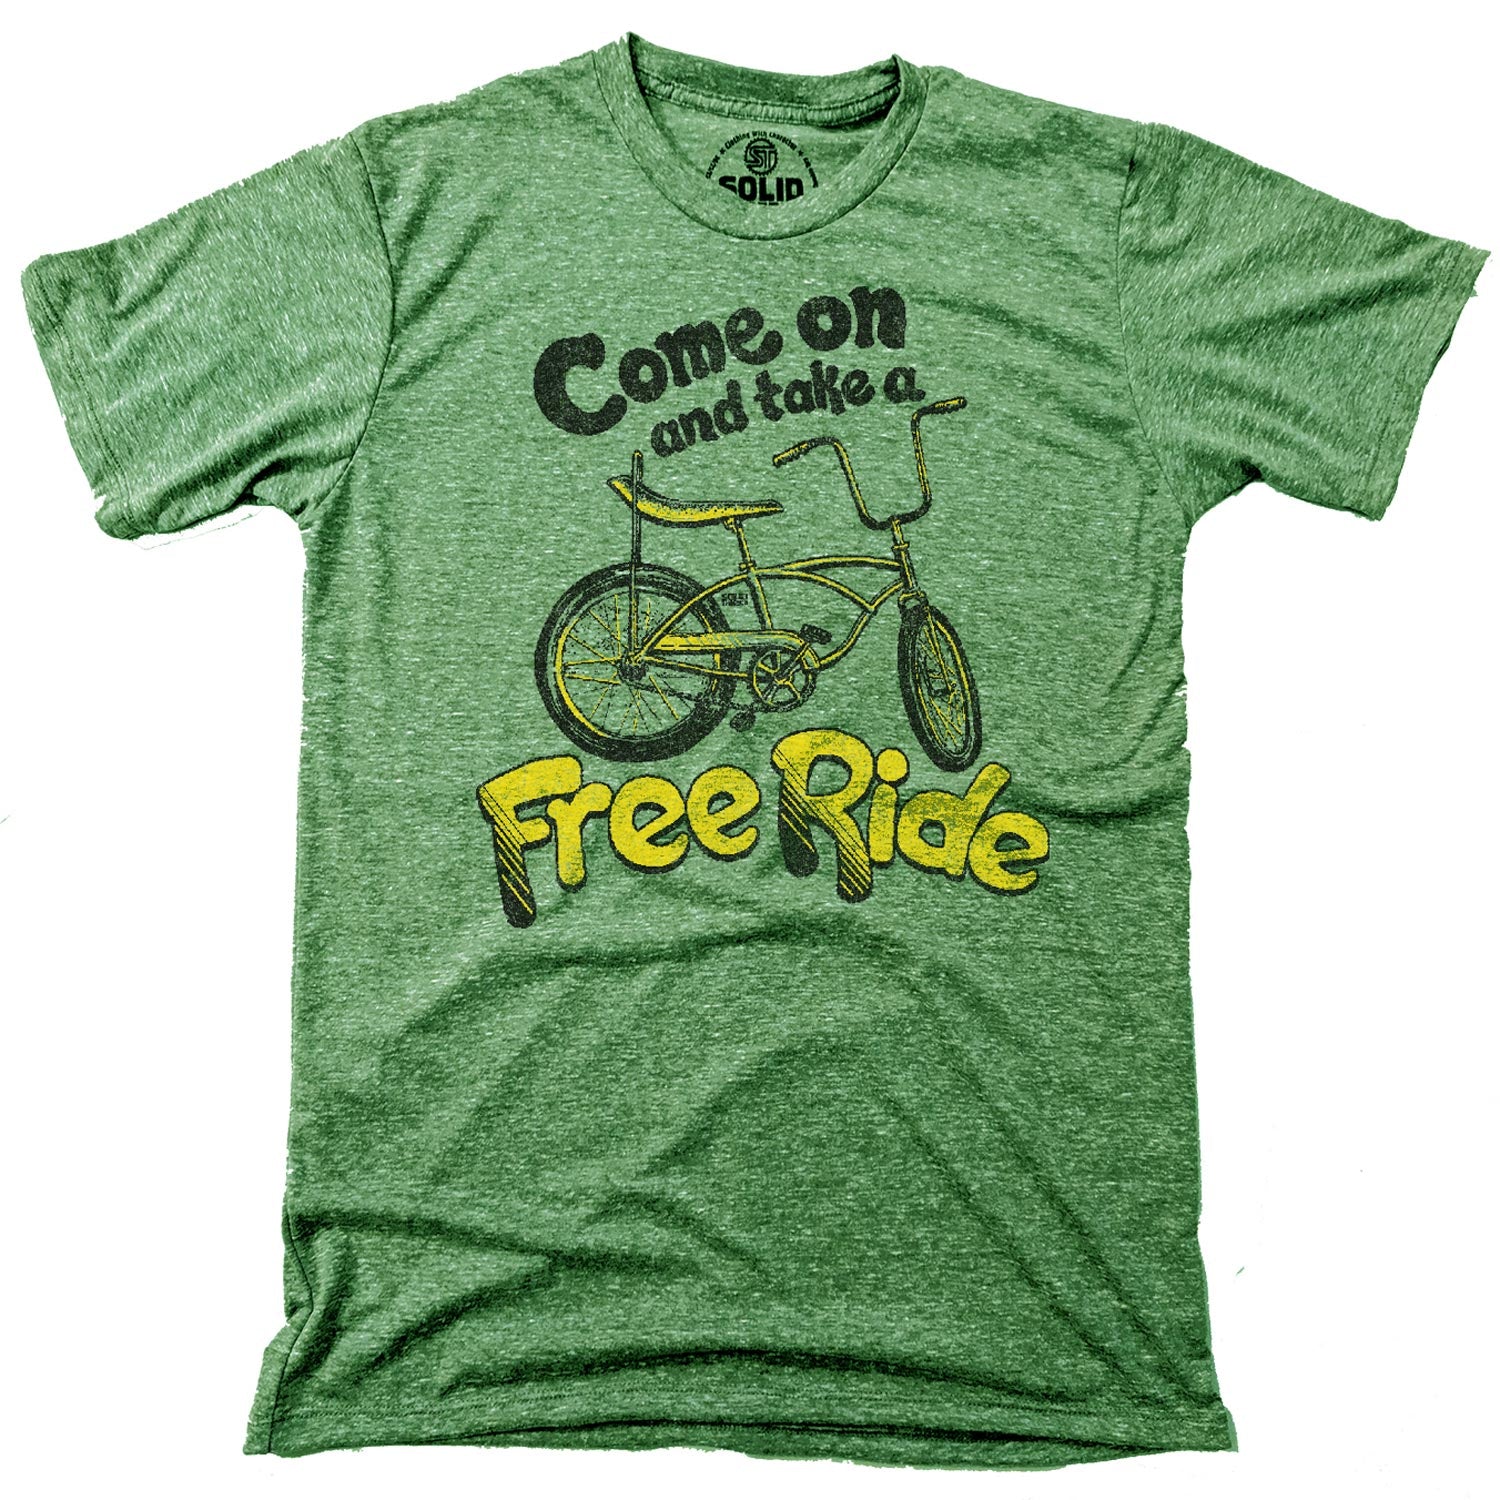 Men's Come On Take a Free Ride Vintage Inspired T-shirt | Retro Bicycle Graphic Tee | Solid Threads